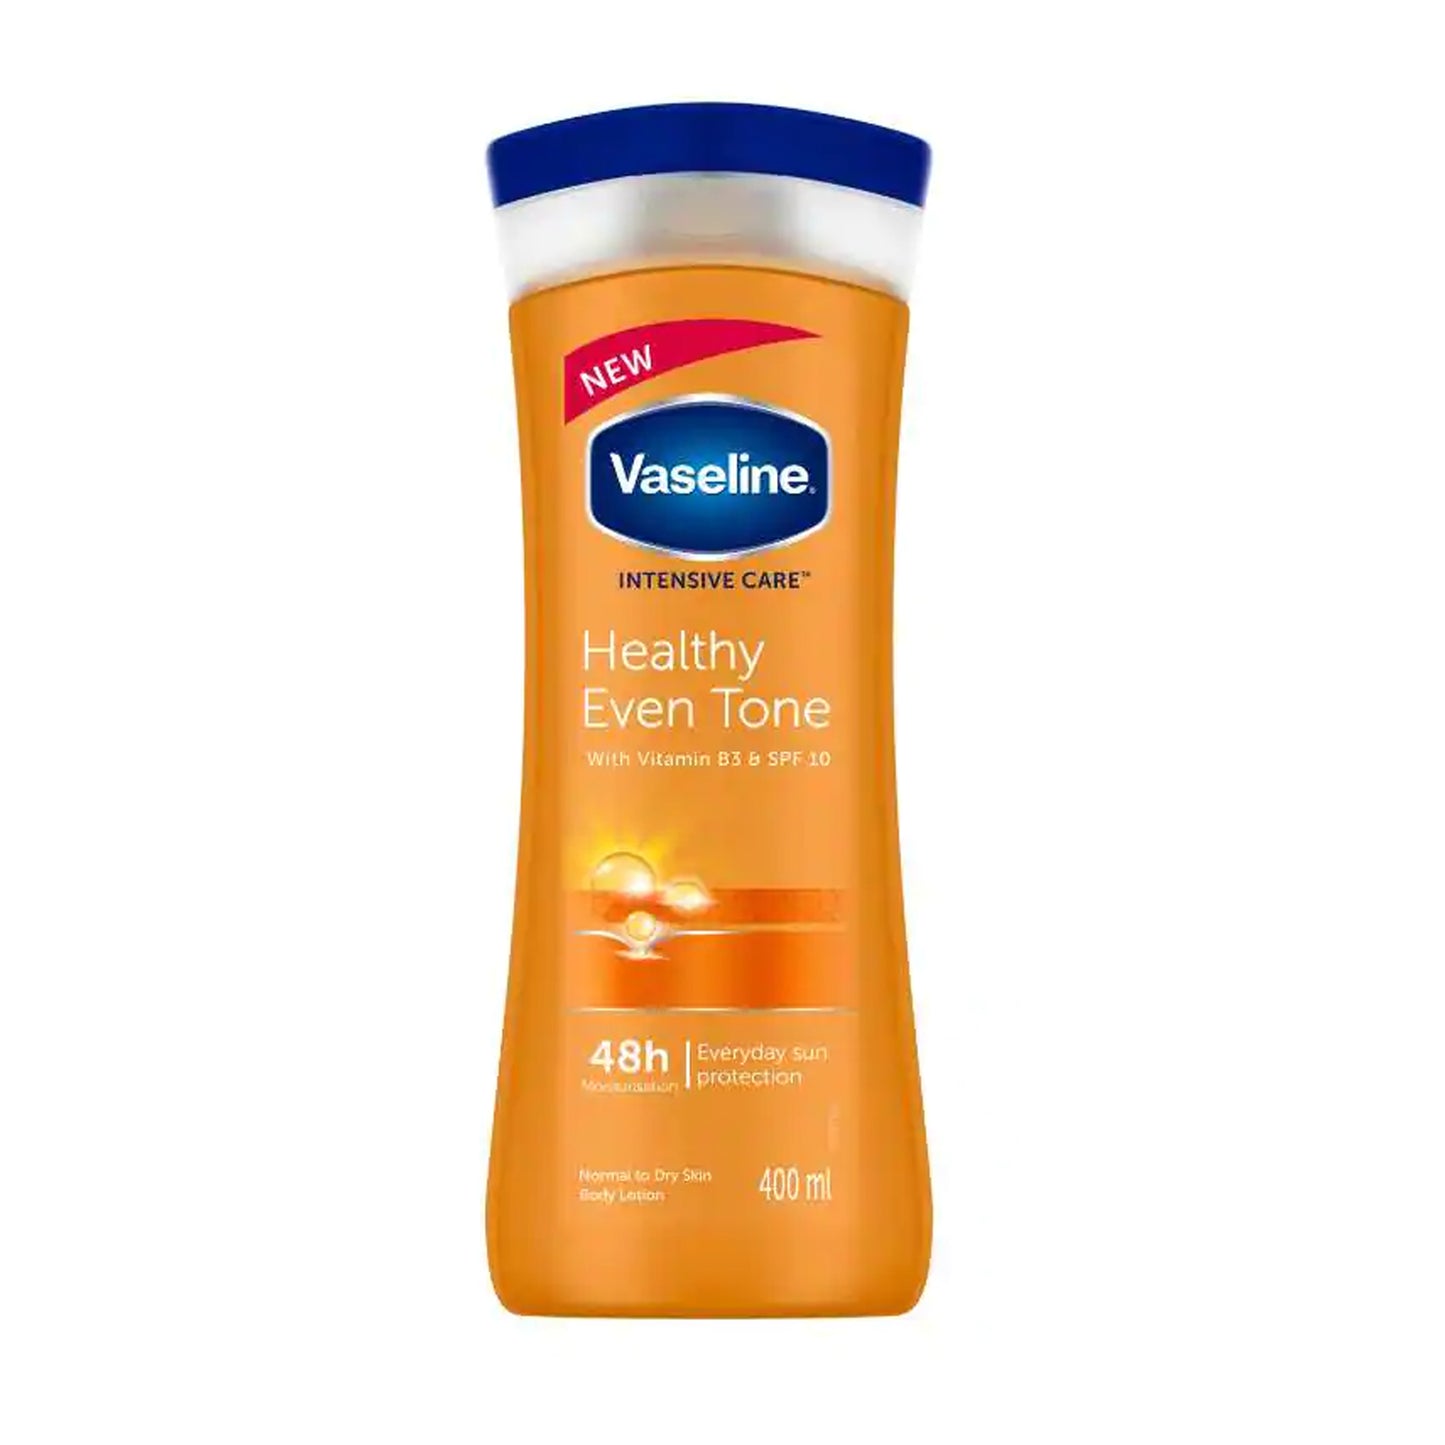 VASELINE - INTENSIVE CARE HEALTHY EVEN TONE BODY LOTION - 400ML